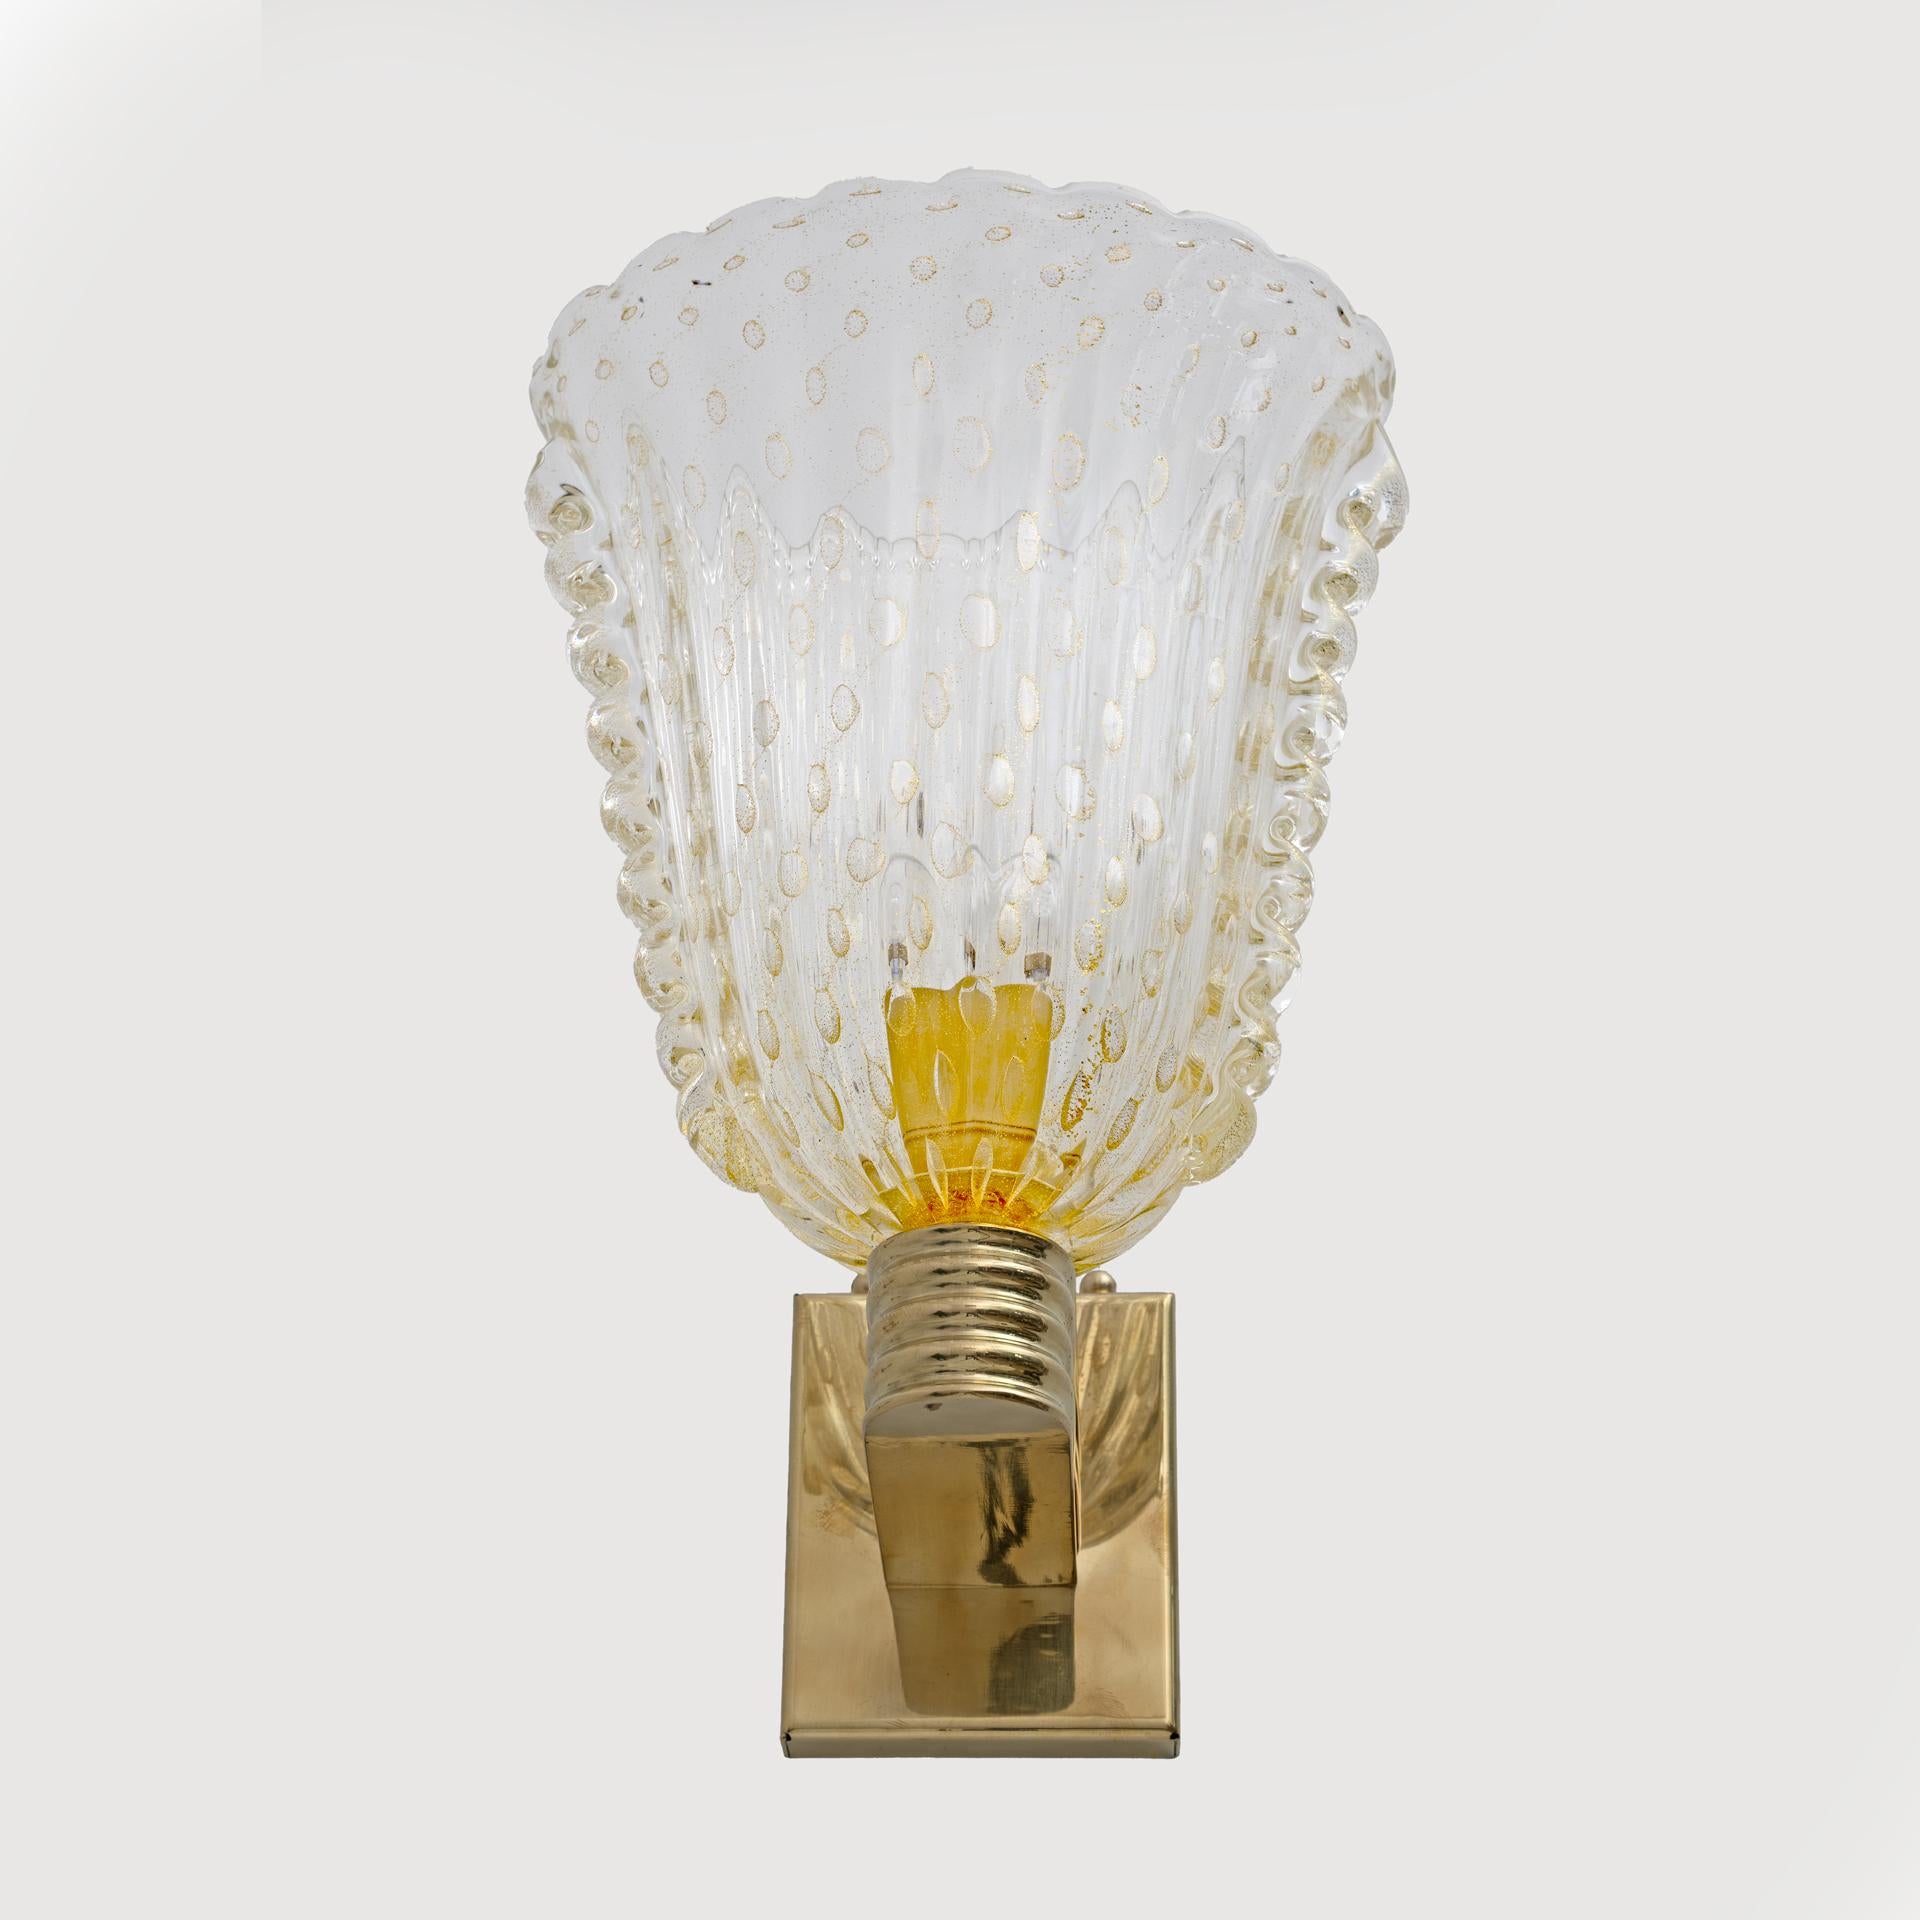 Art Deco Attributed to Barovier & Toso Brass and Pulegoso Murano Glass Sconces, Pair For Sale